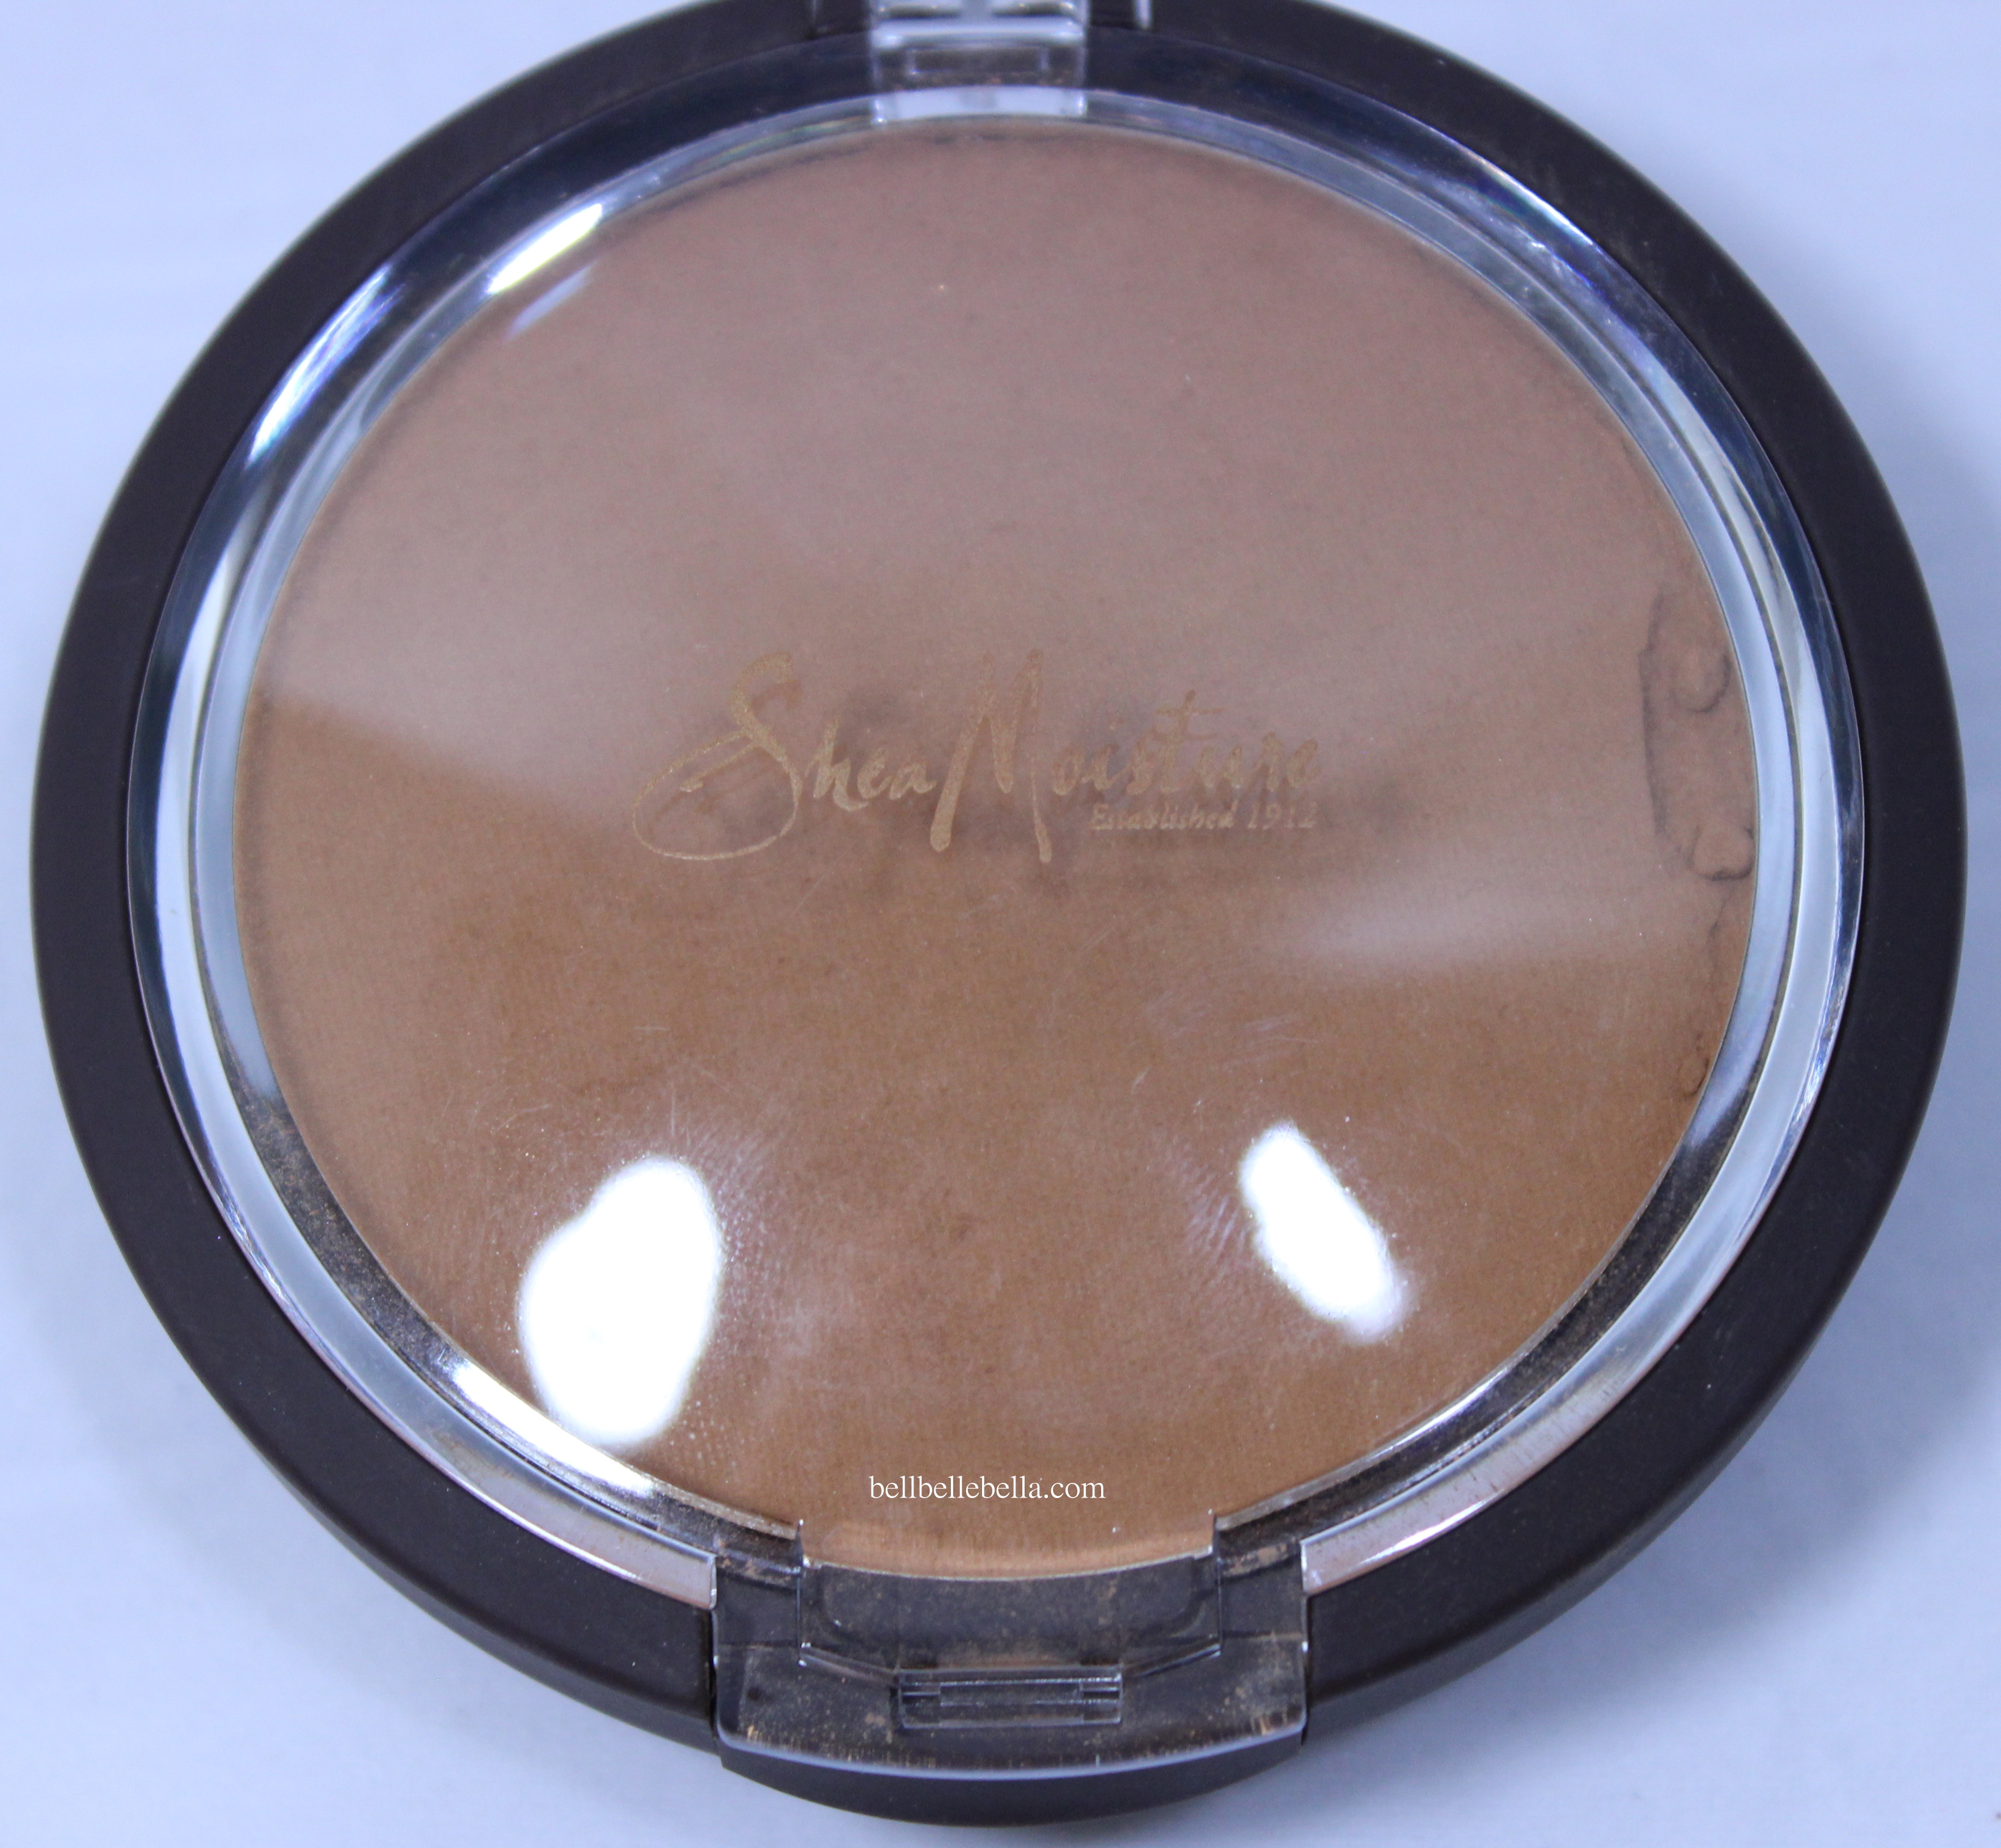 Shea Moisture Cosmetics Wet/Dry Pressed Powder Foundation Review graphic